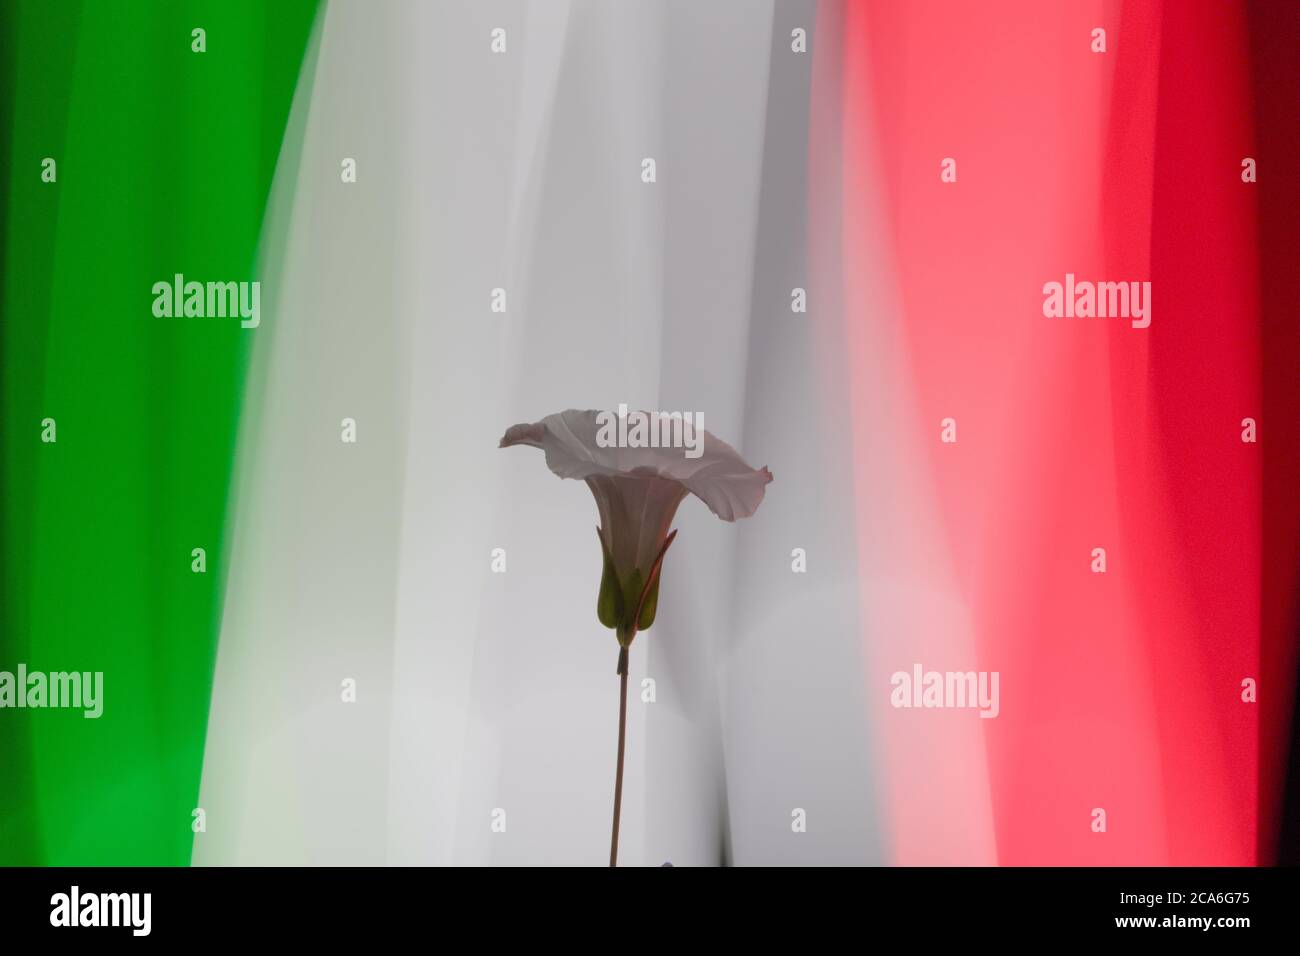 White flower under darkness symbolizing peace, in front of a Italian flag made of color lights with long exposure Stock Photo